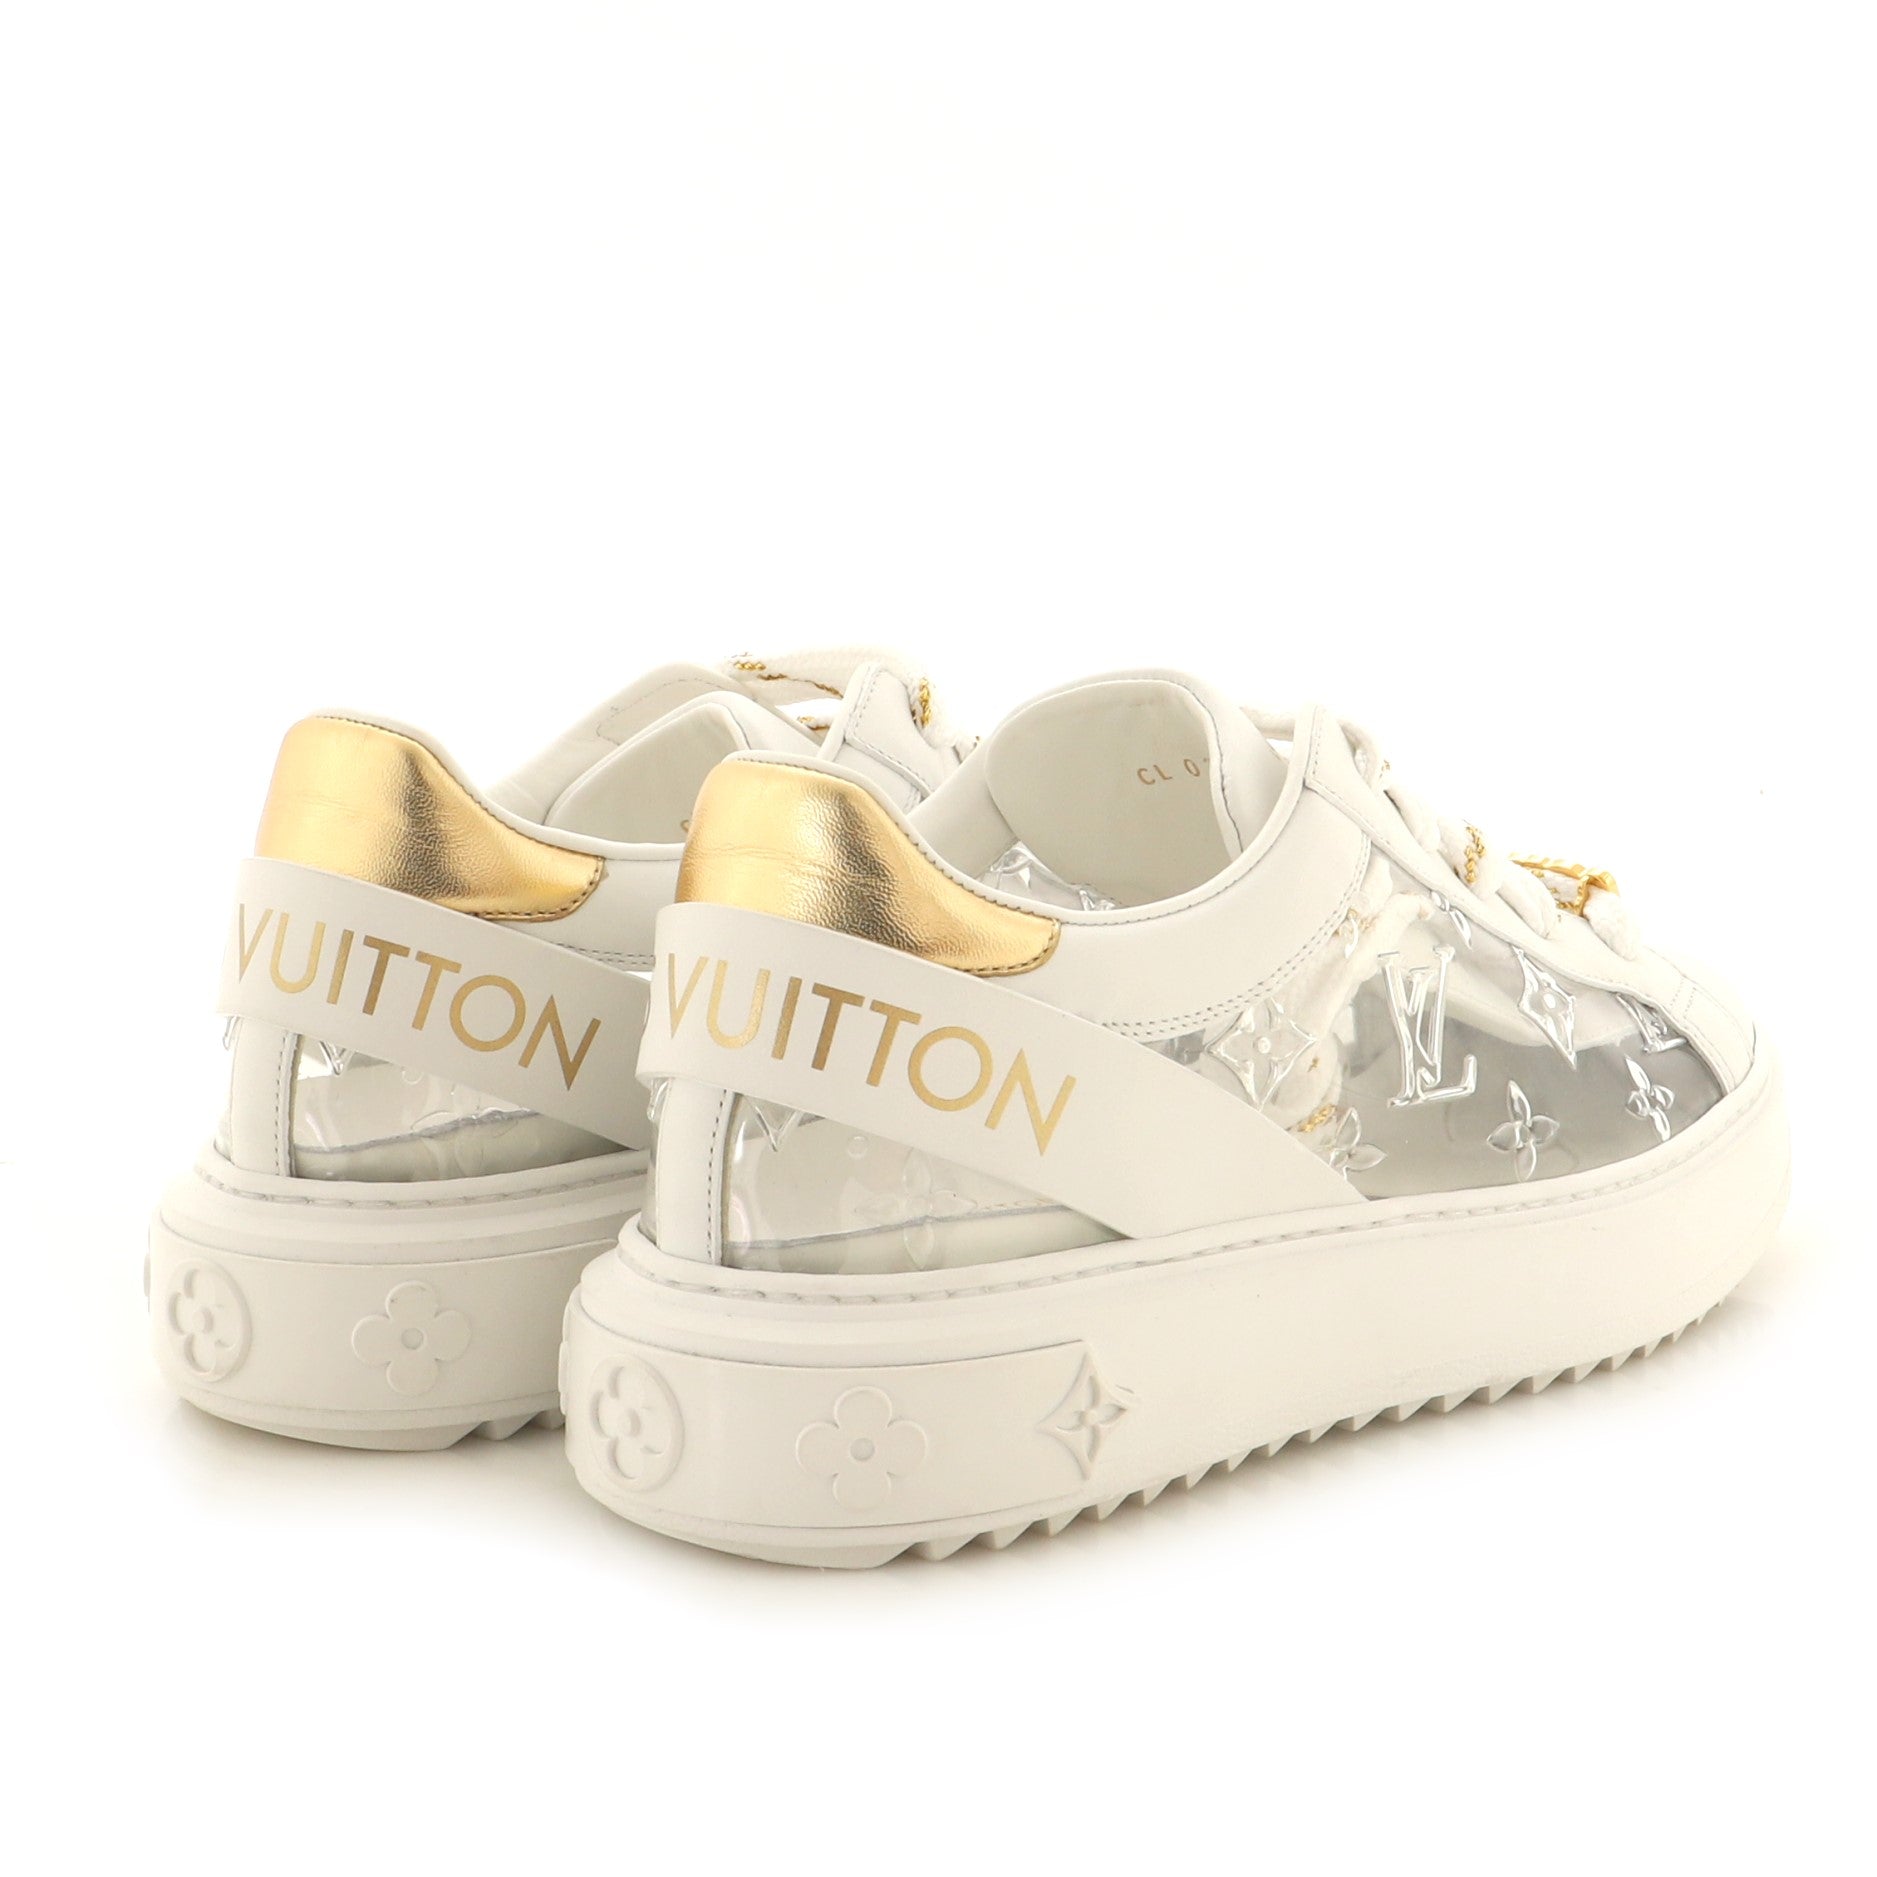 Louis Vuitton Calf leather and Monogram canvas TIME OUT TRAINERS 1AAF7C